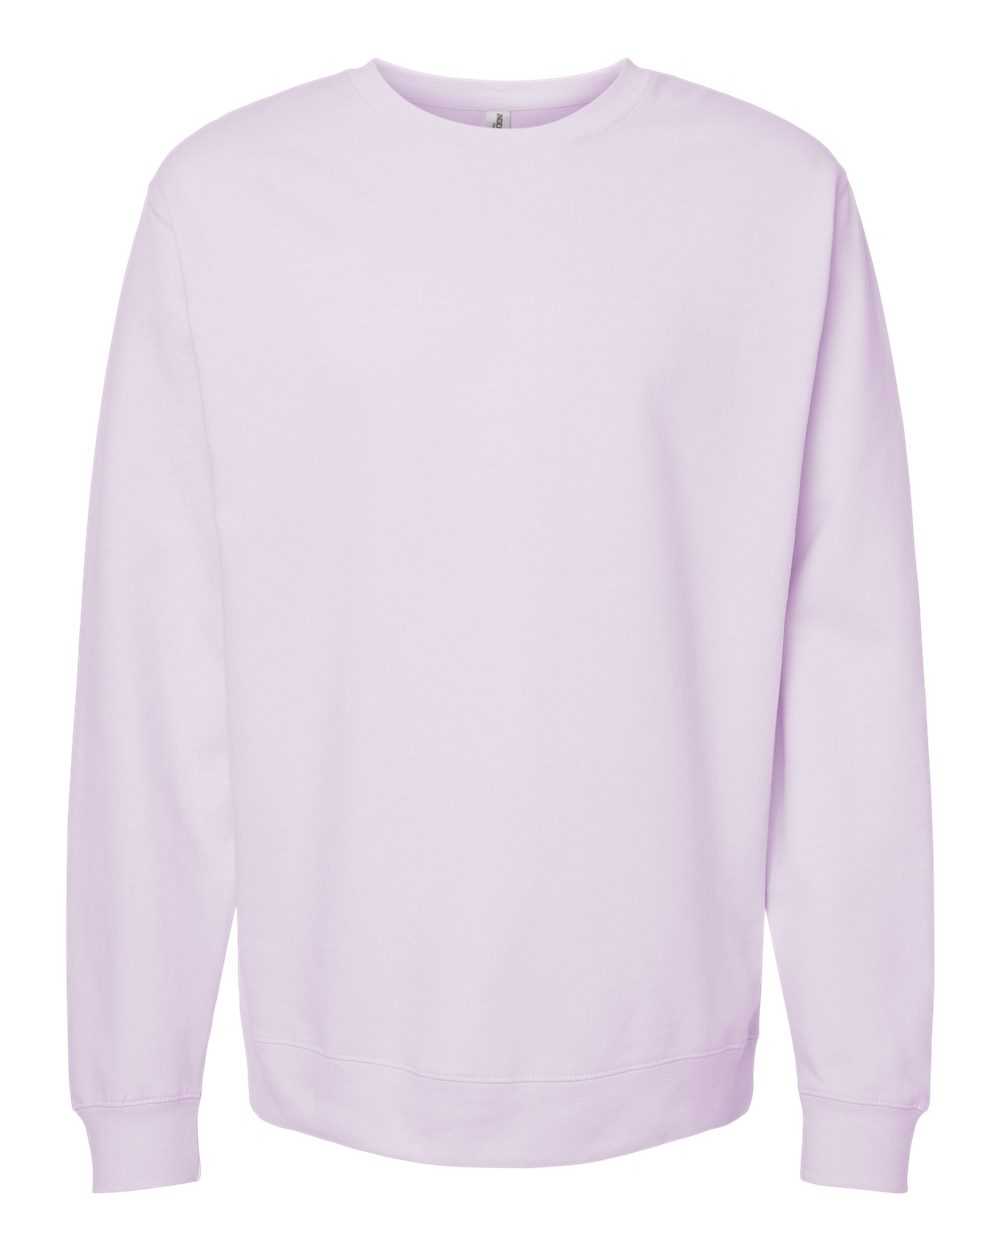 Independent Trading Co SS3000 Midweight Sweatshirt - Lavender - HIT a Double - 1